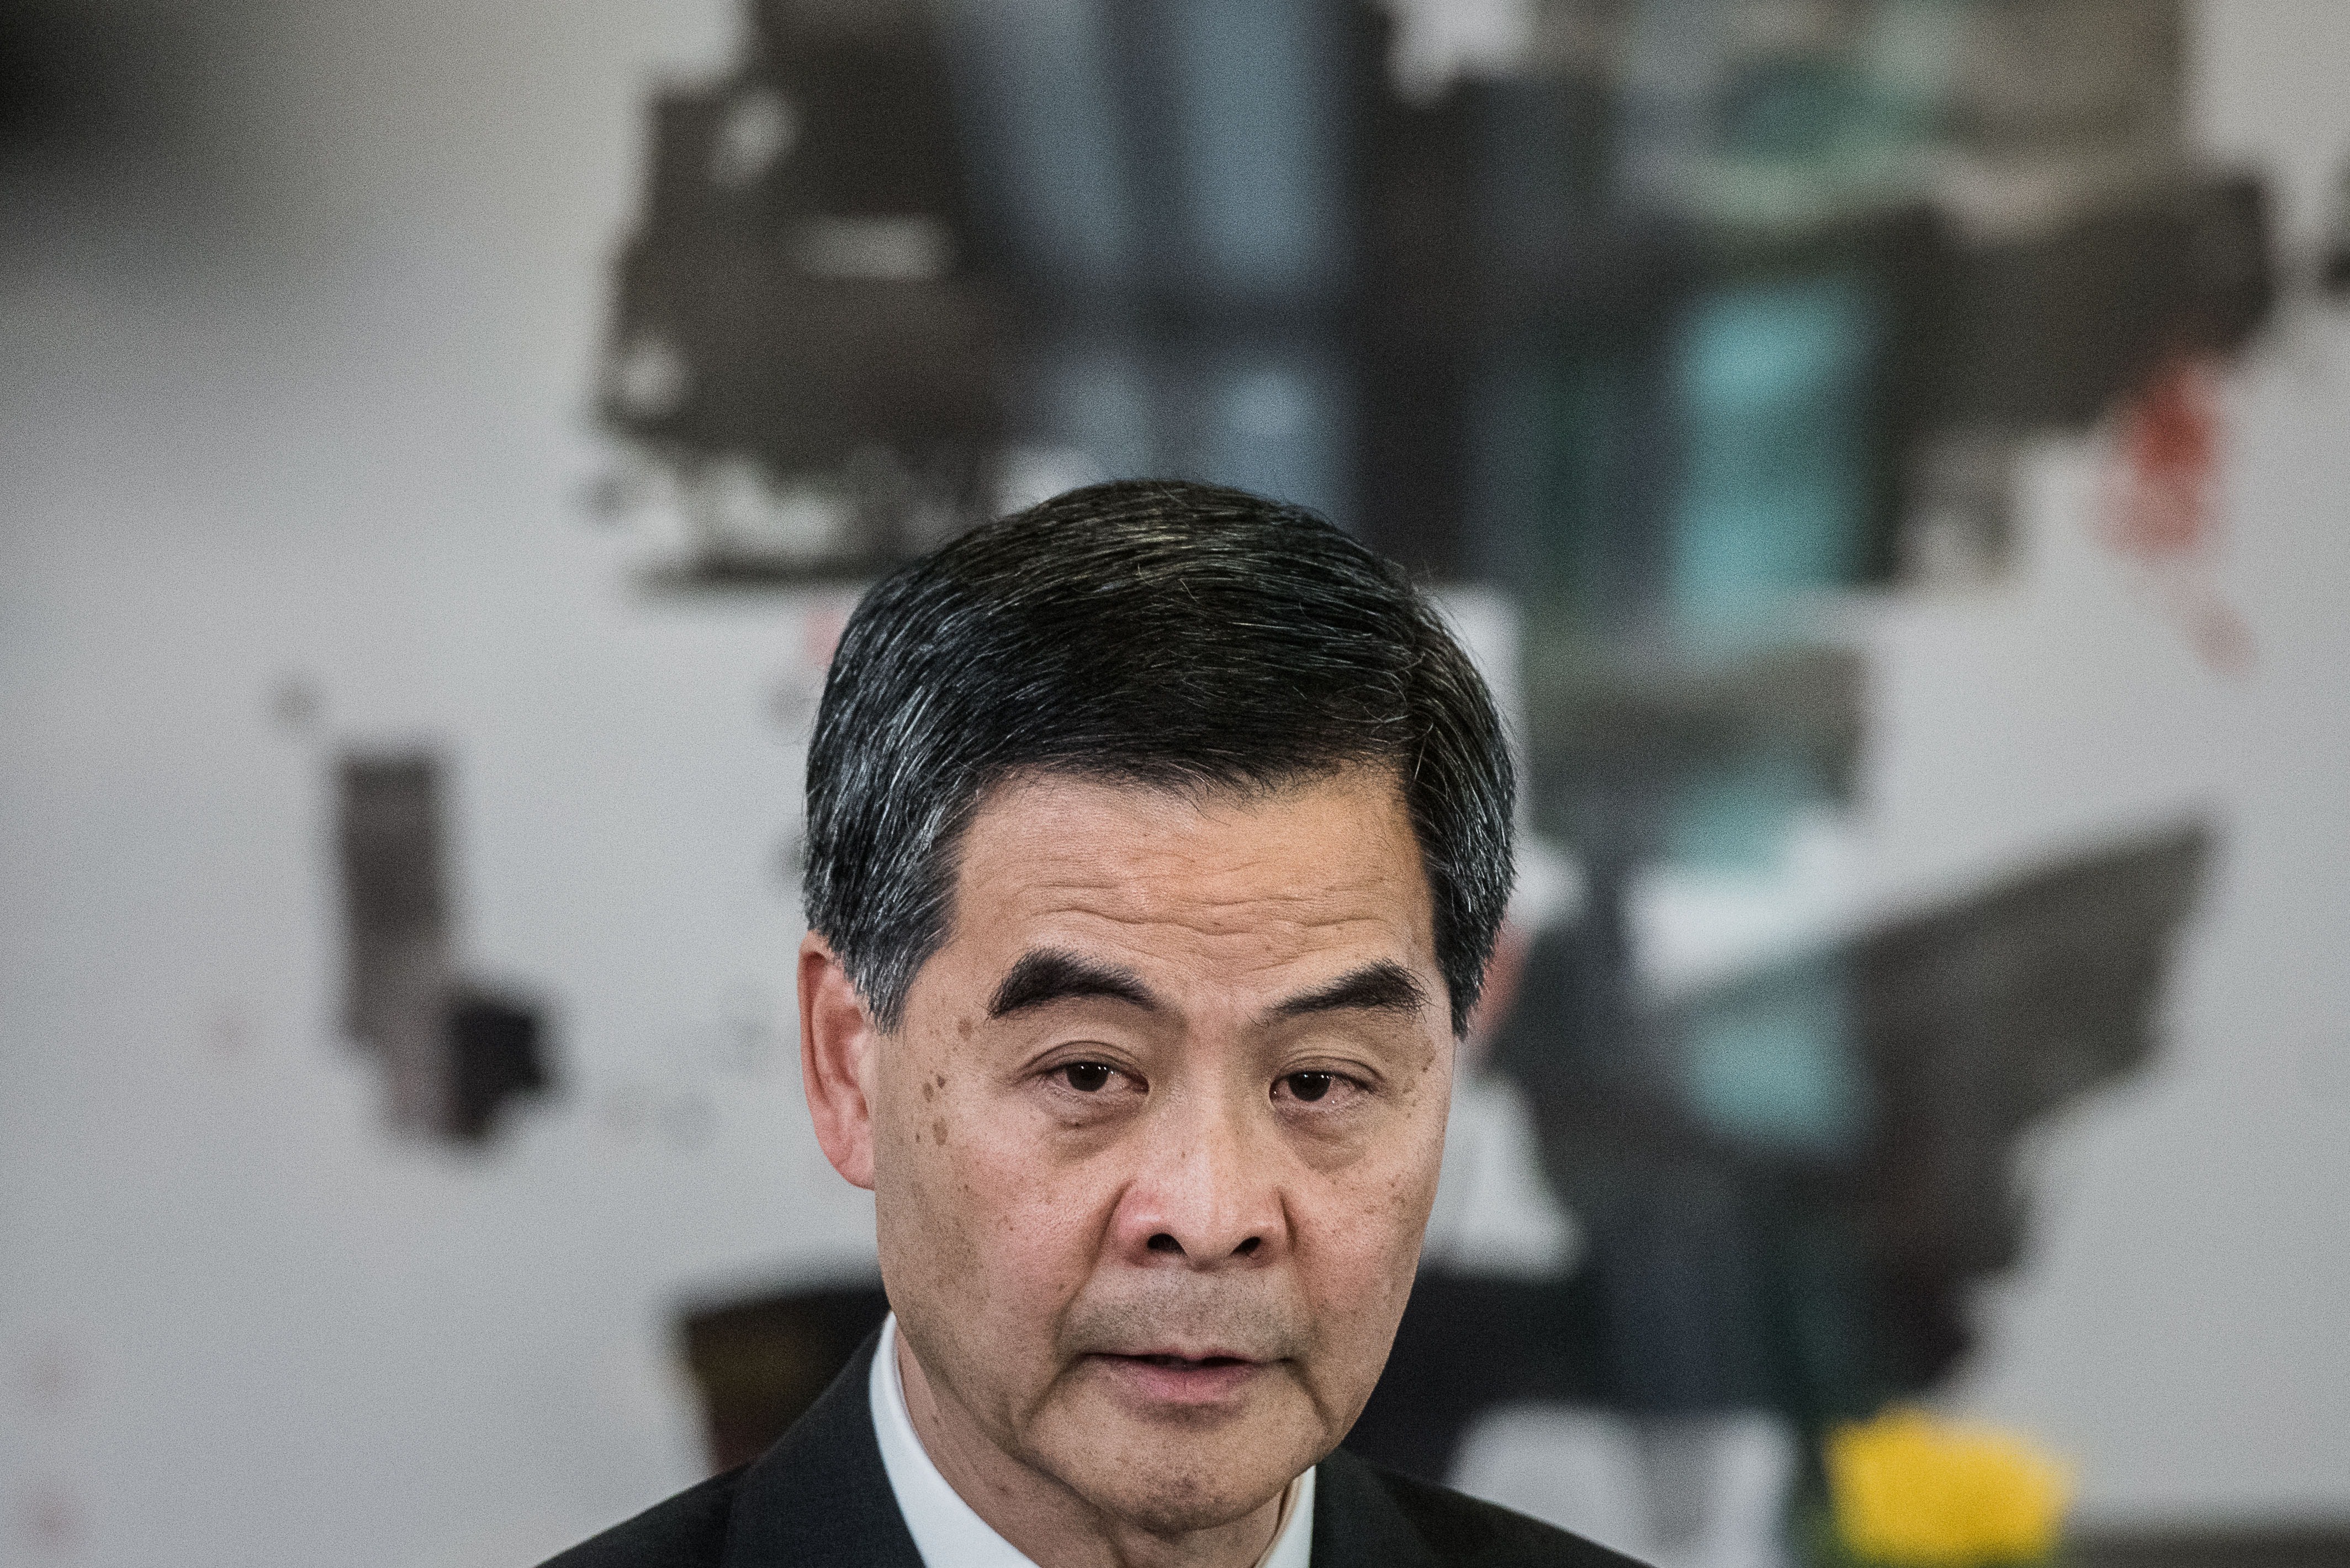 Hong Kong Chief Executive Leung Chun-ying answers questions during a press conference in Hong Kong on Oct. 16, 2014 (Philippe Lopez—AFP/Getty Images)